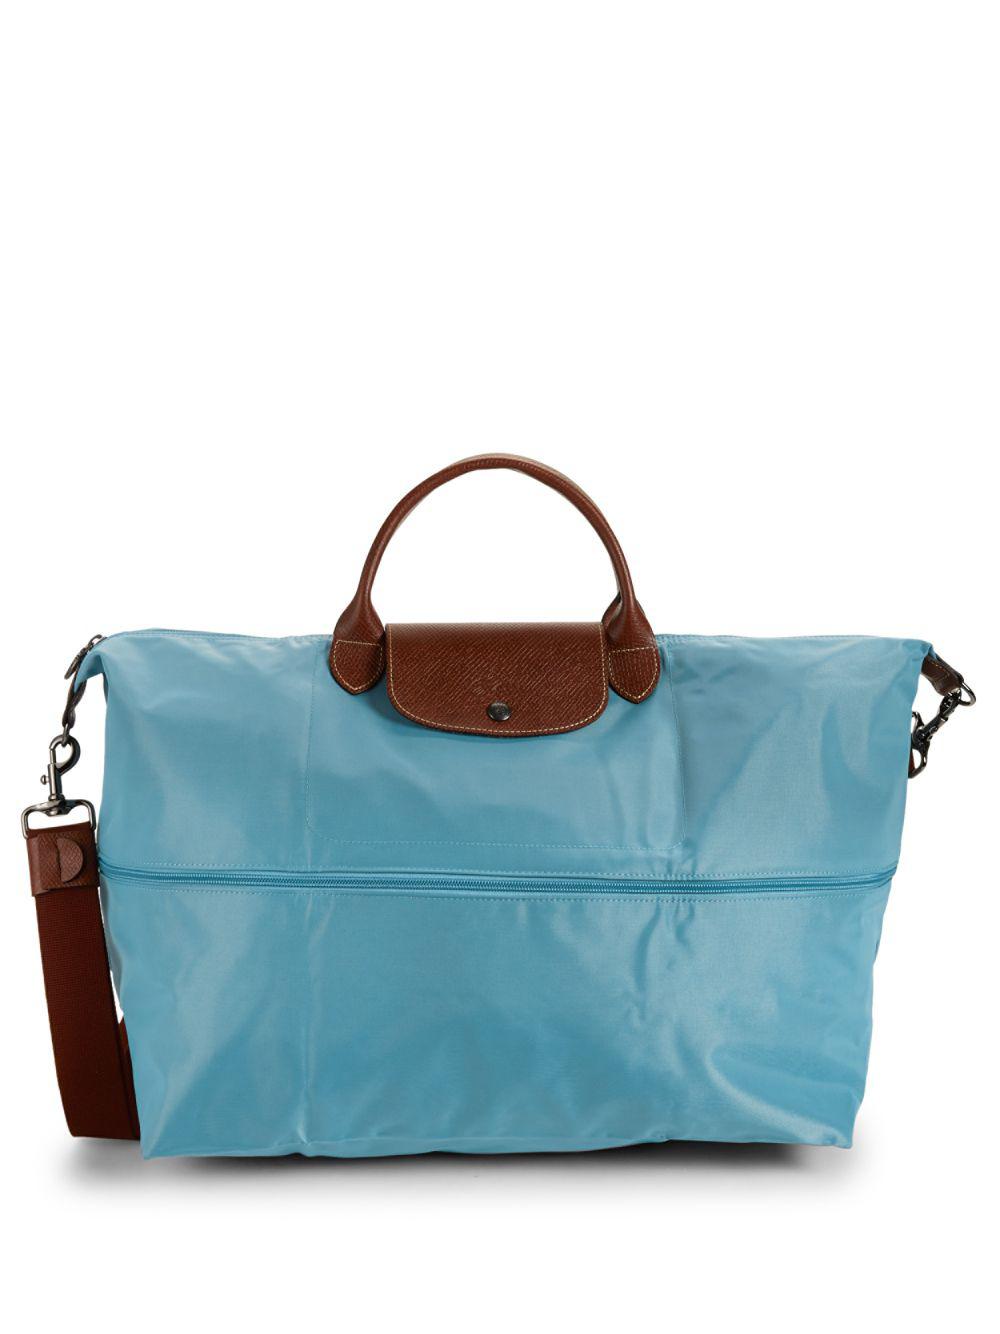 Longchamp Synthetic Foldable Travel Bag in Blue - Lyst